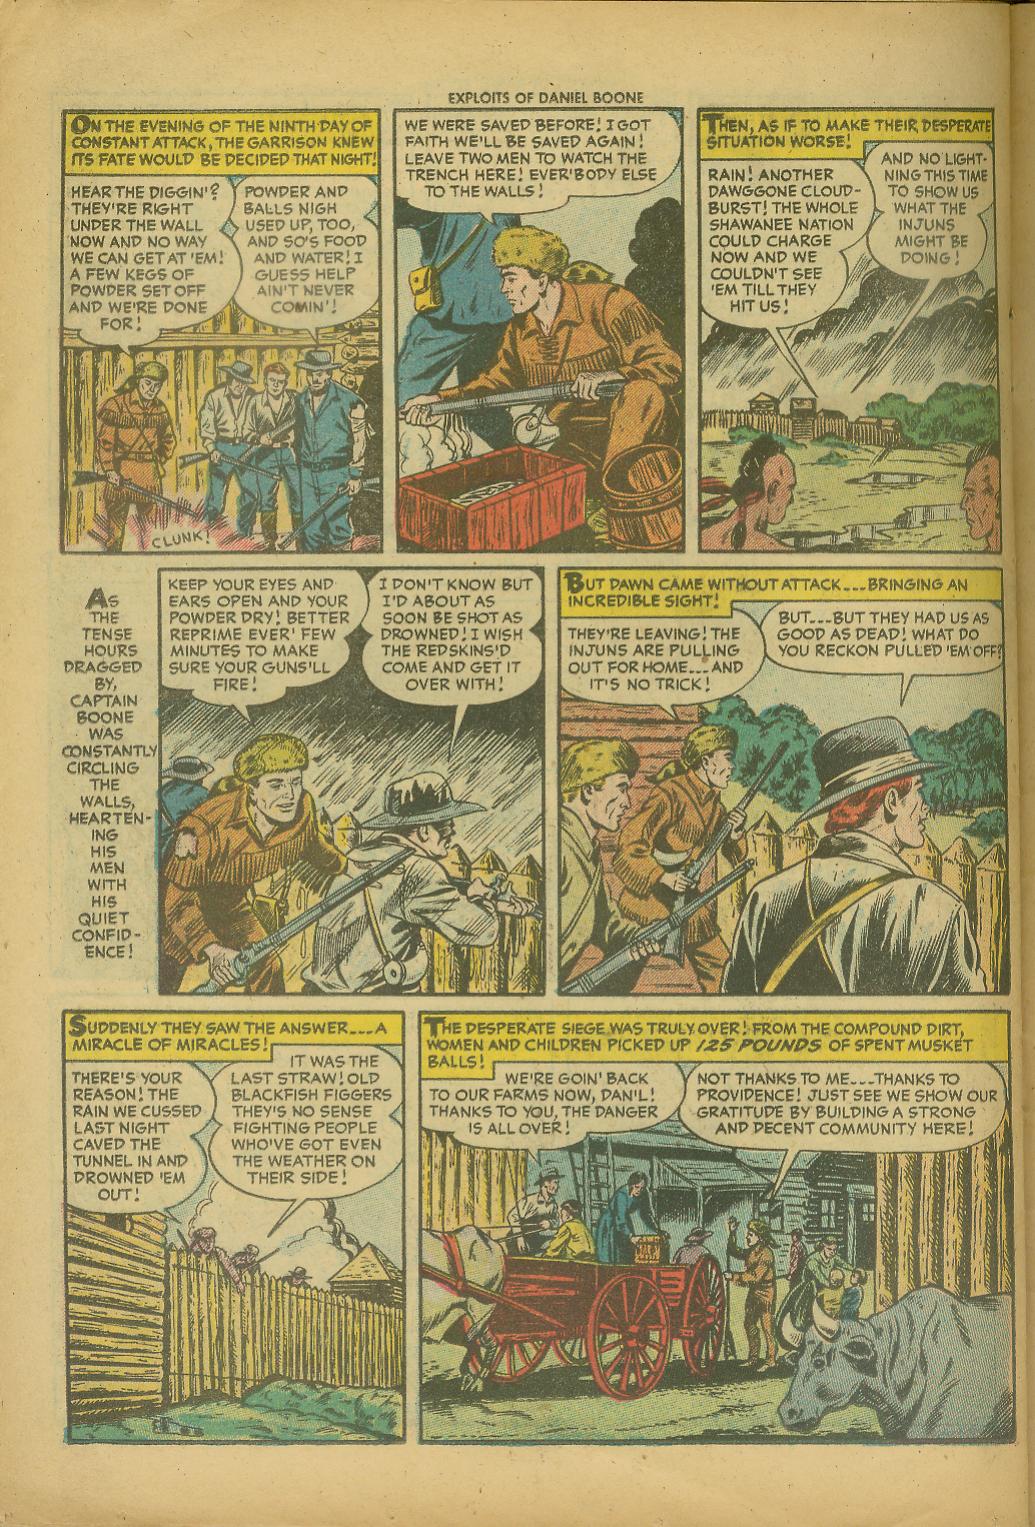 Read online Exploits of Daniel Boone comic -  Issue #1 - 26